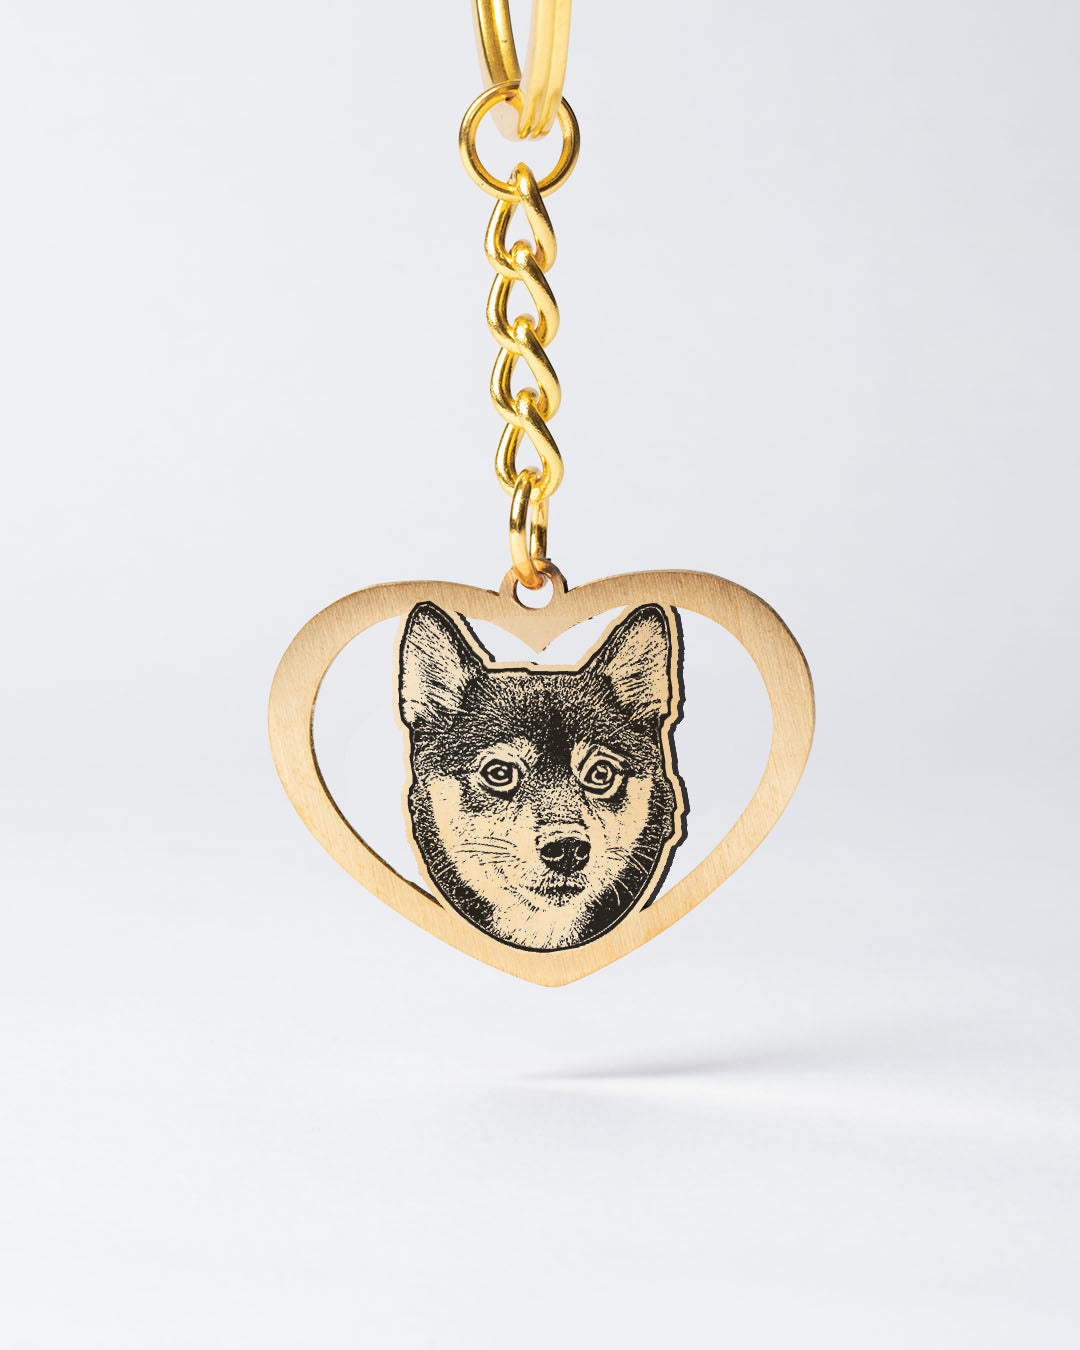 Custom Engraved Halo Heart Dog Keychain with Personalized Photo - Heartfelt Memorial Gift for Pet Lovers